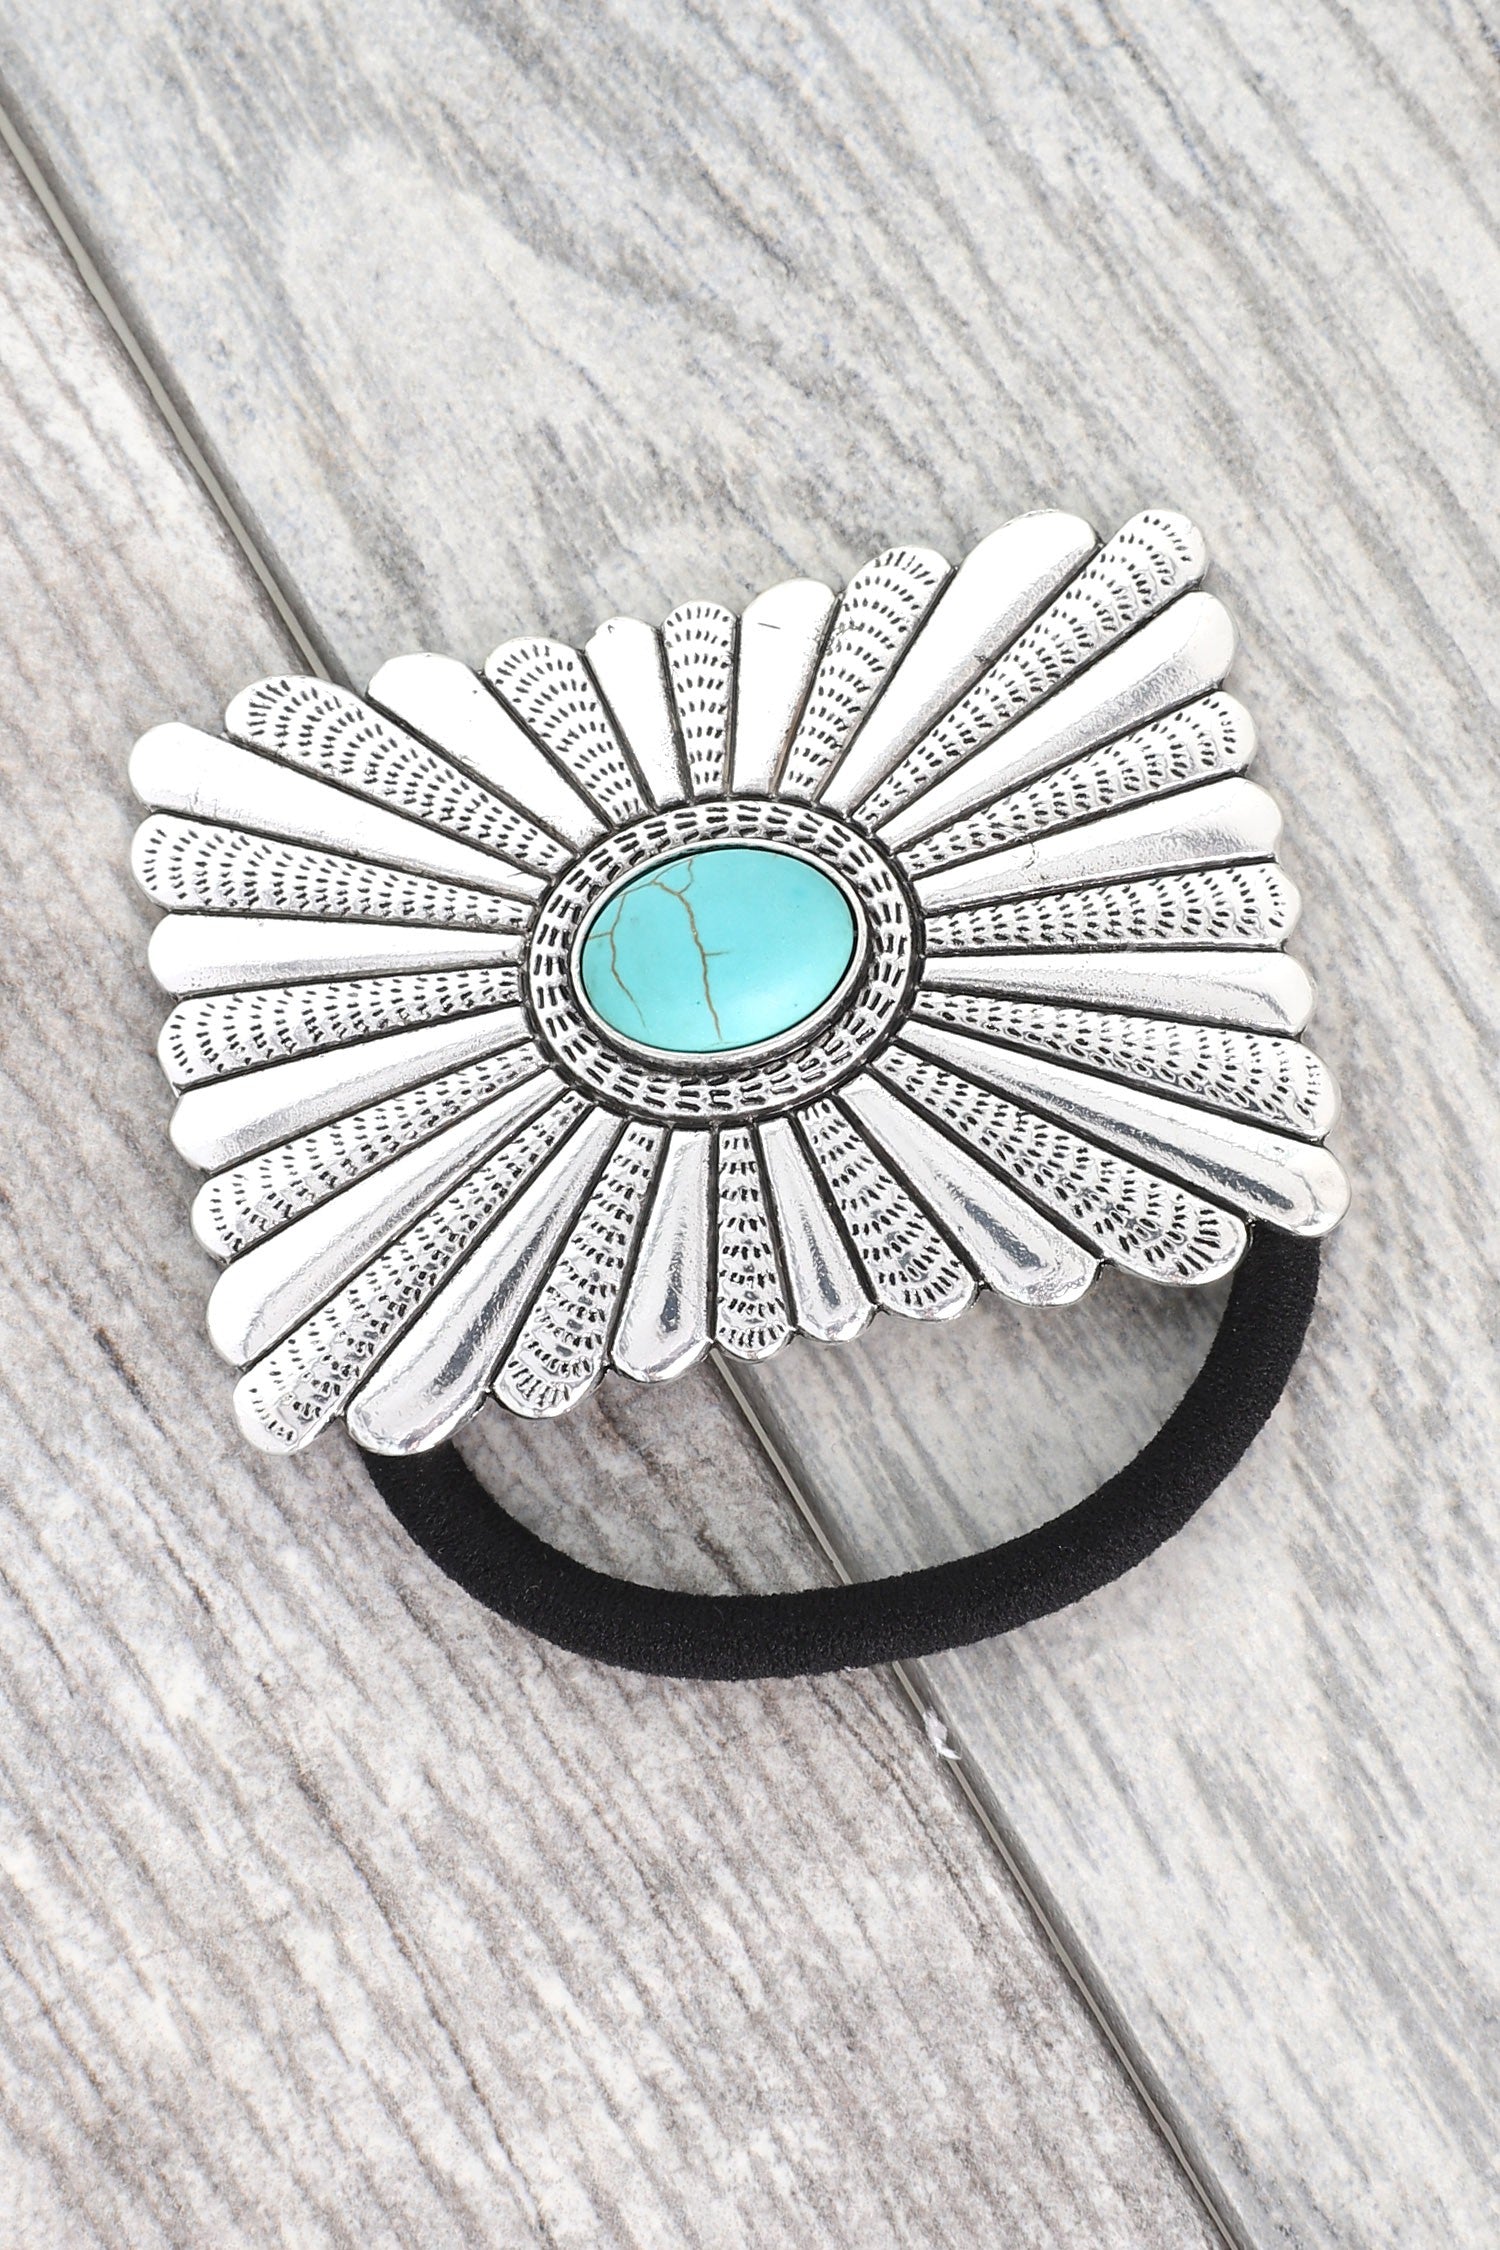 Southwest Inspired Silver and Turquoise Pony Tail Holder